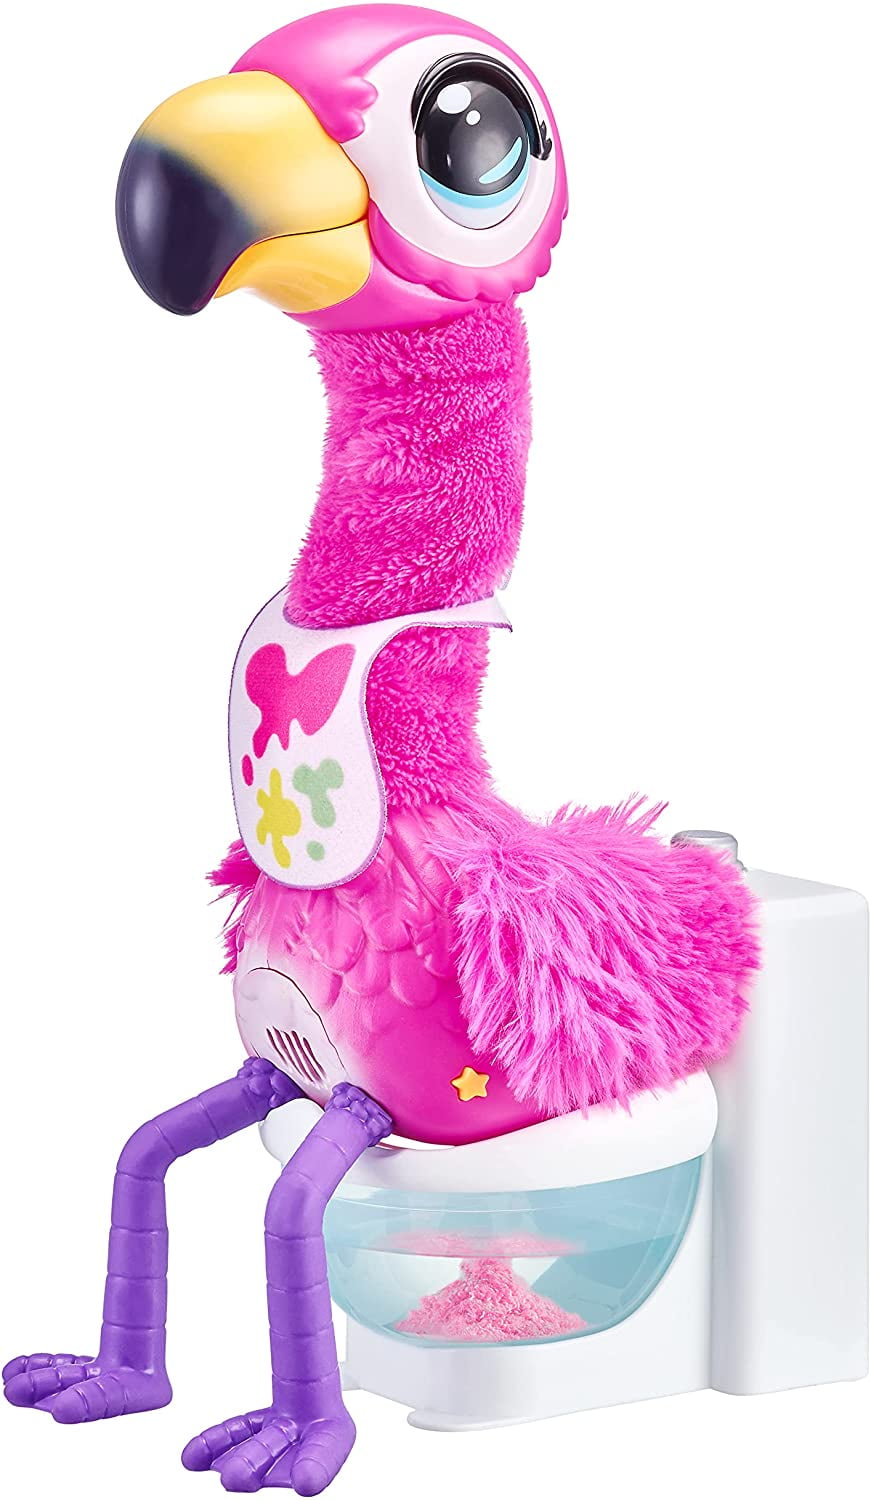 NEW LITTLE LIVE PETS SHERBET THE GOTTA GO FLAMINGO INTERACTIVE TOY FREE SHIPPING 